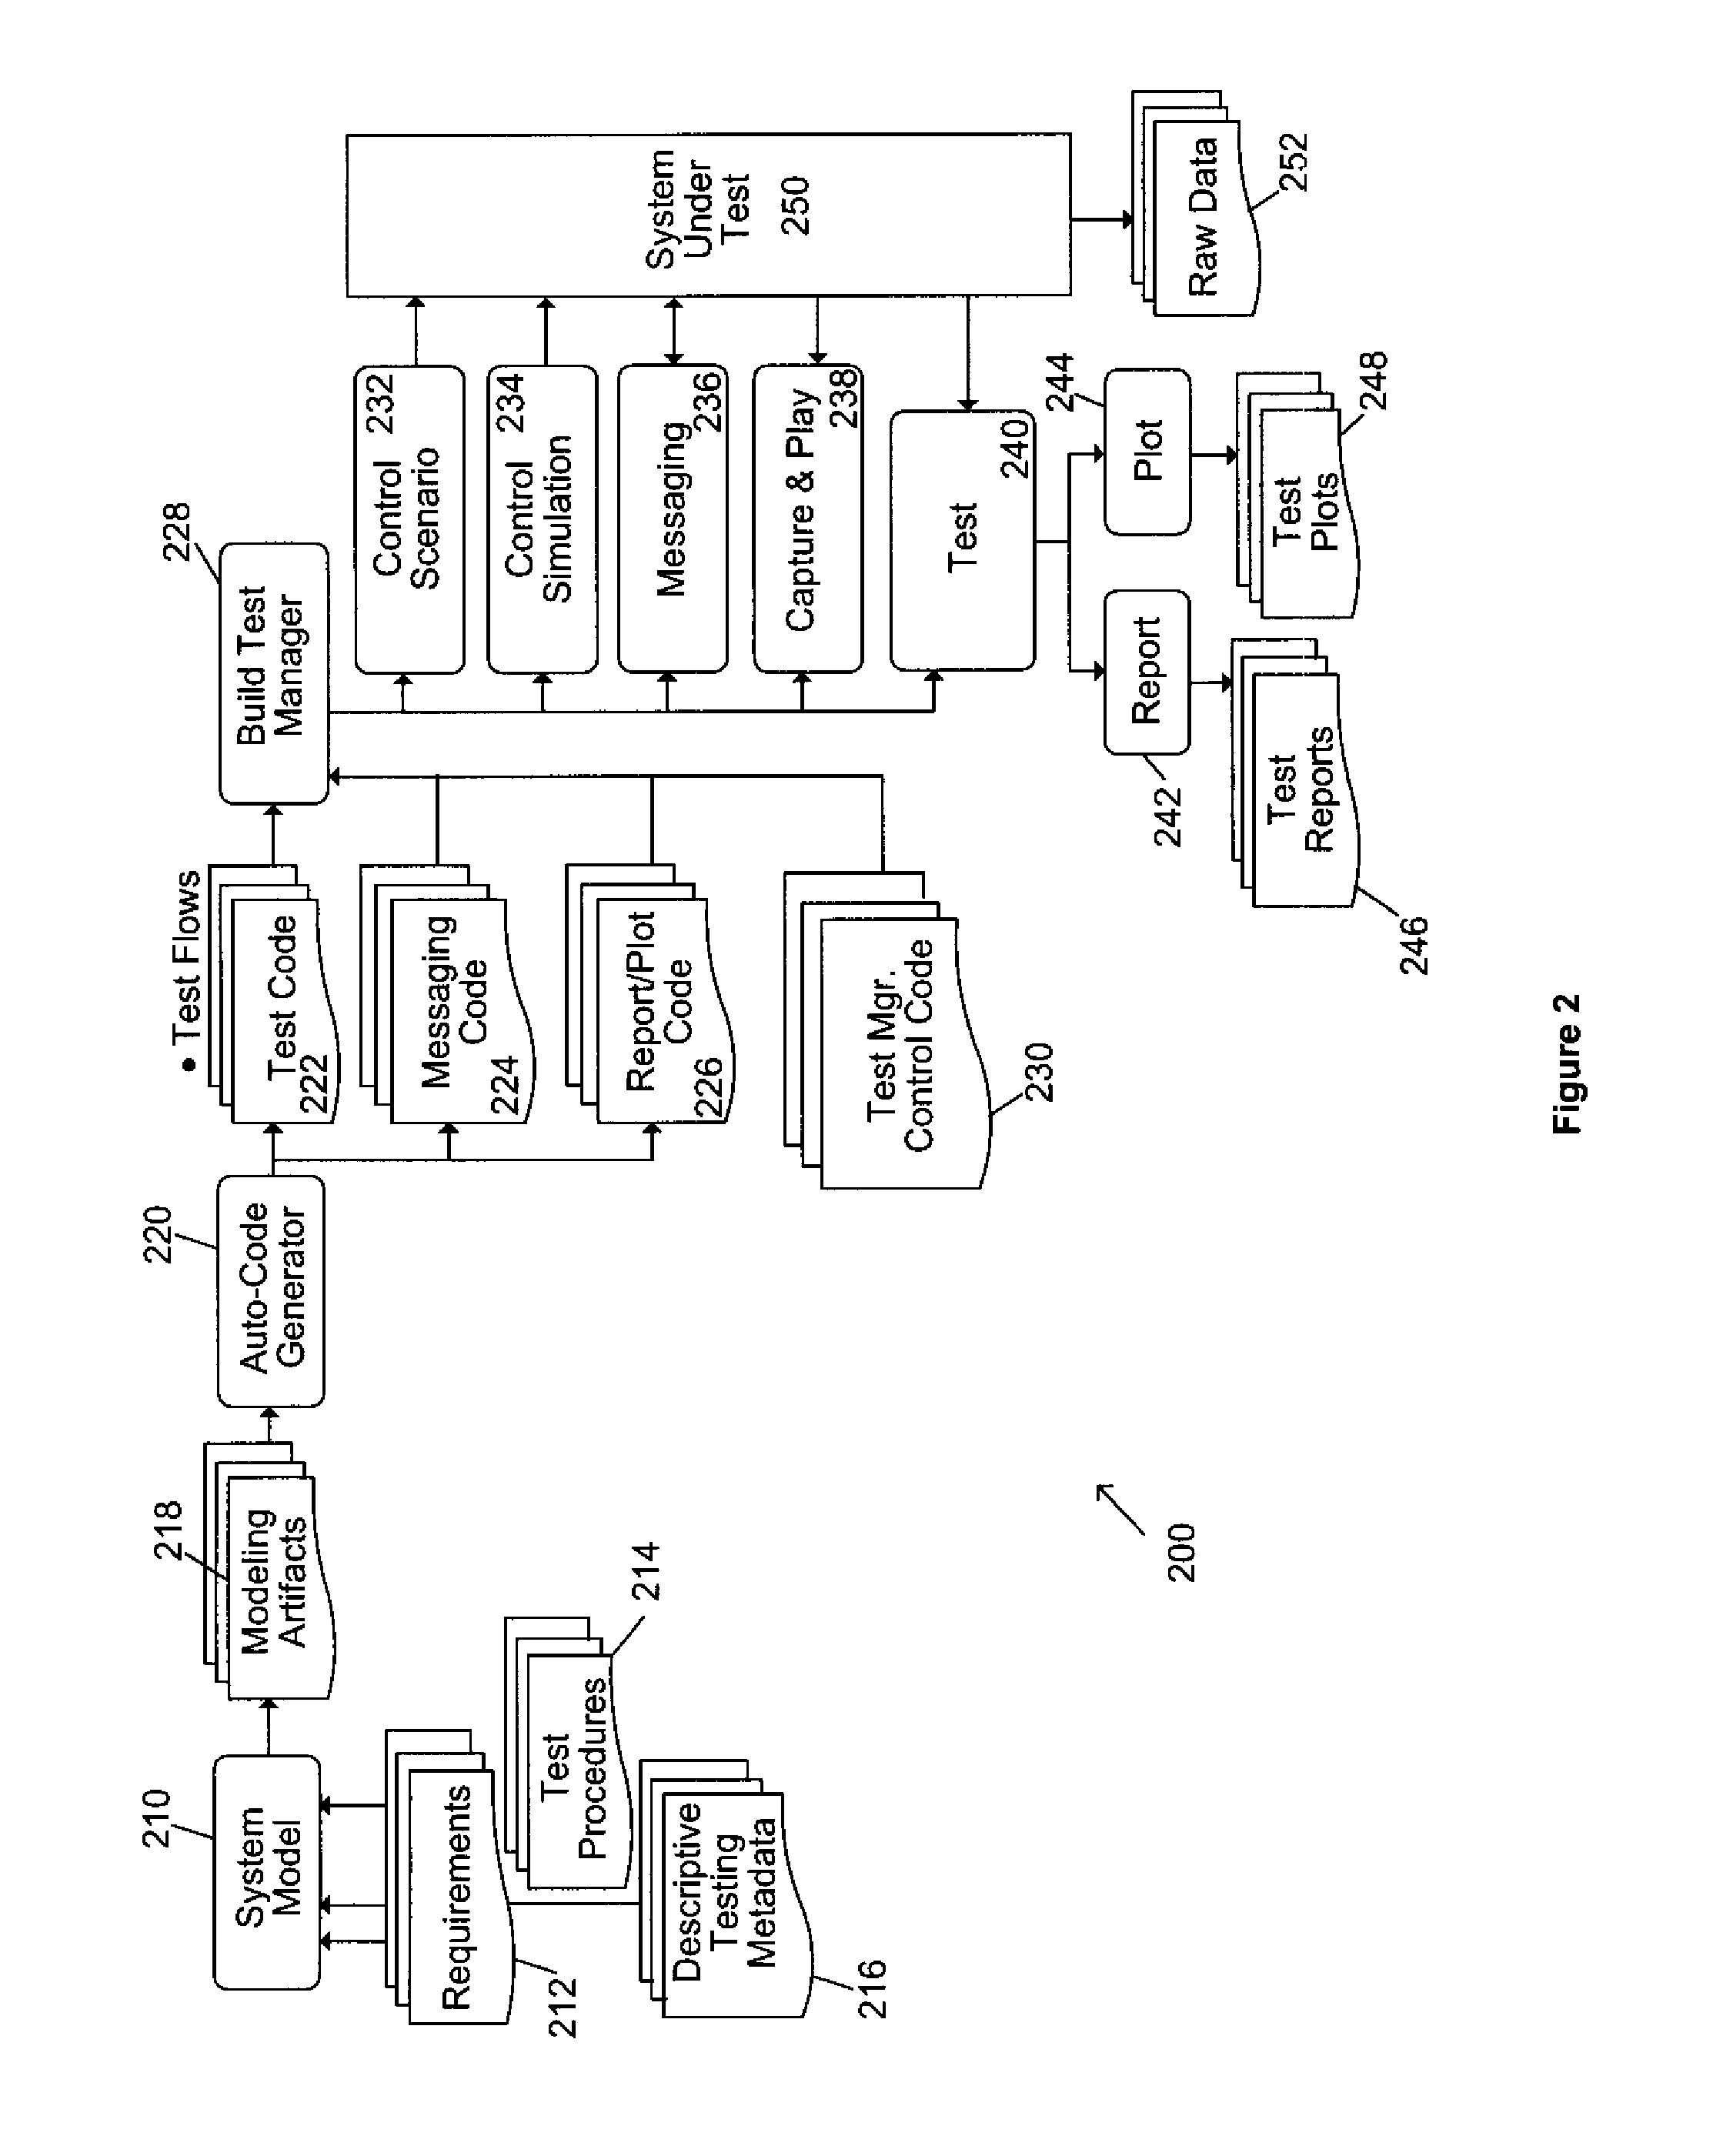 Method and system for implementing automated test and retest procedures